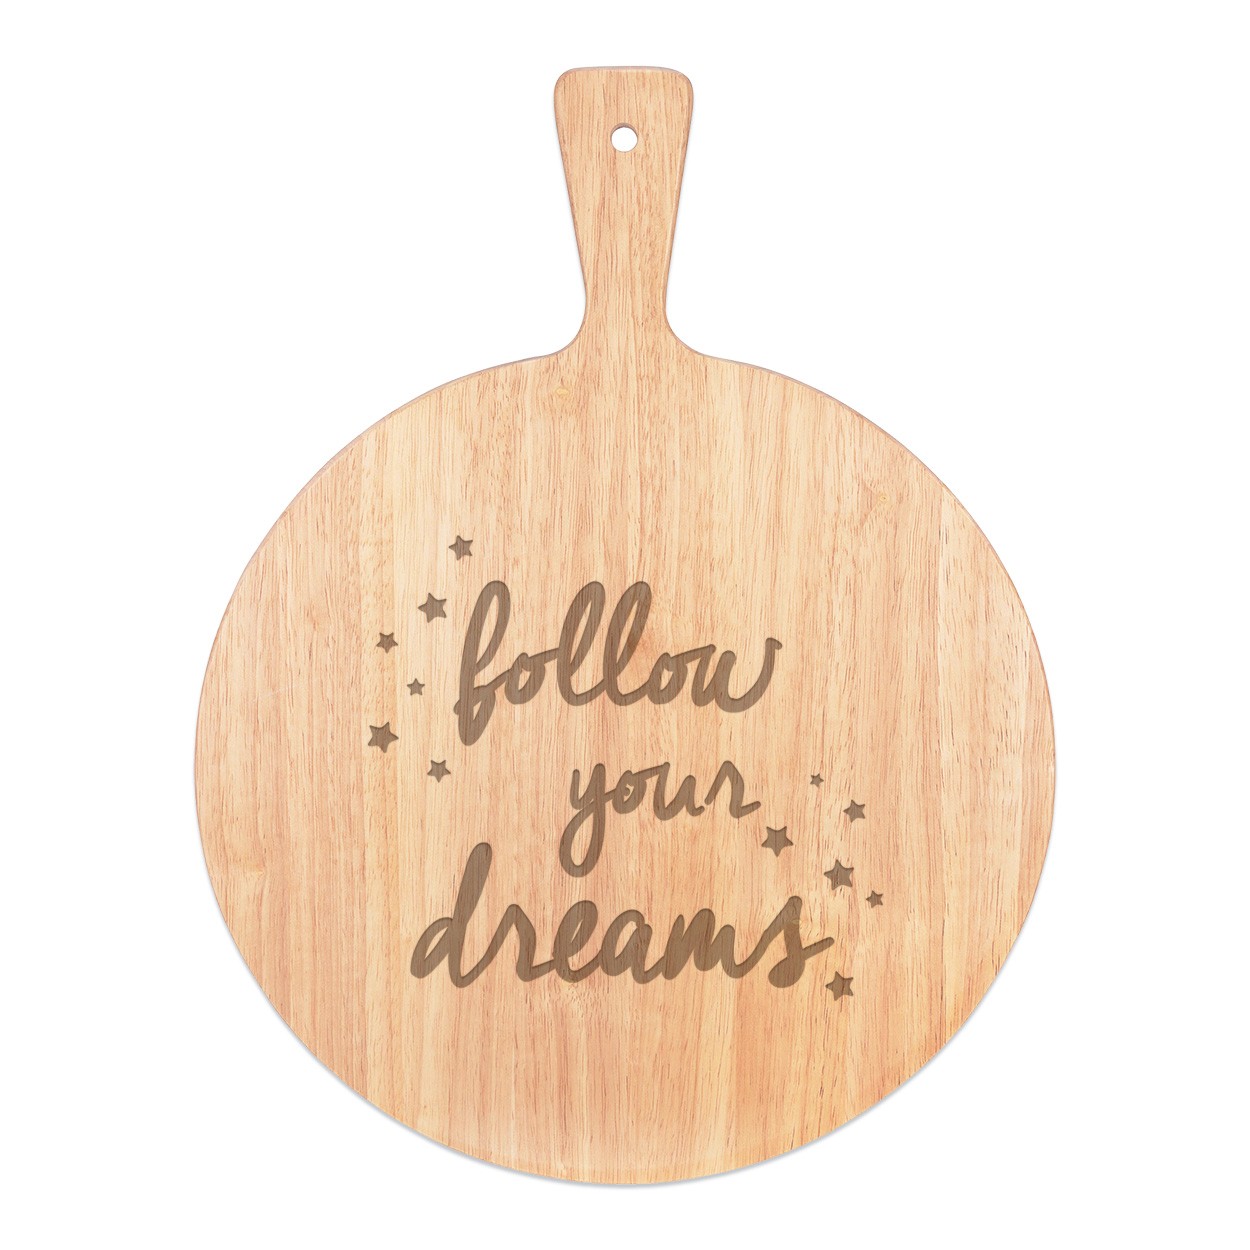 Follow Your Dreams Pizza Board Paddle Serving Tray Handle Round Wooden 45x34cm